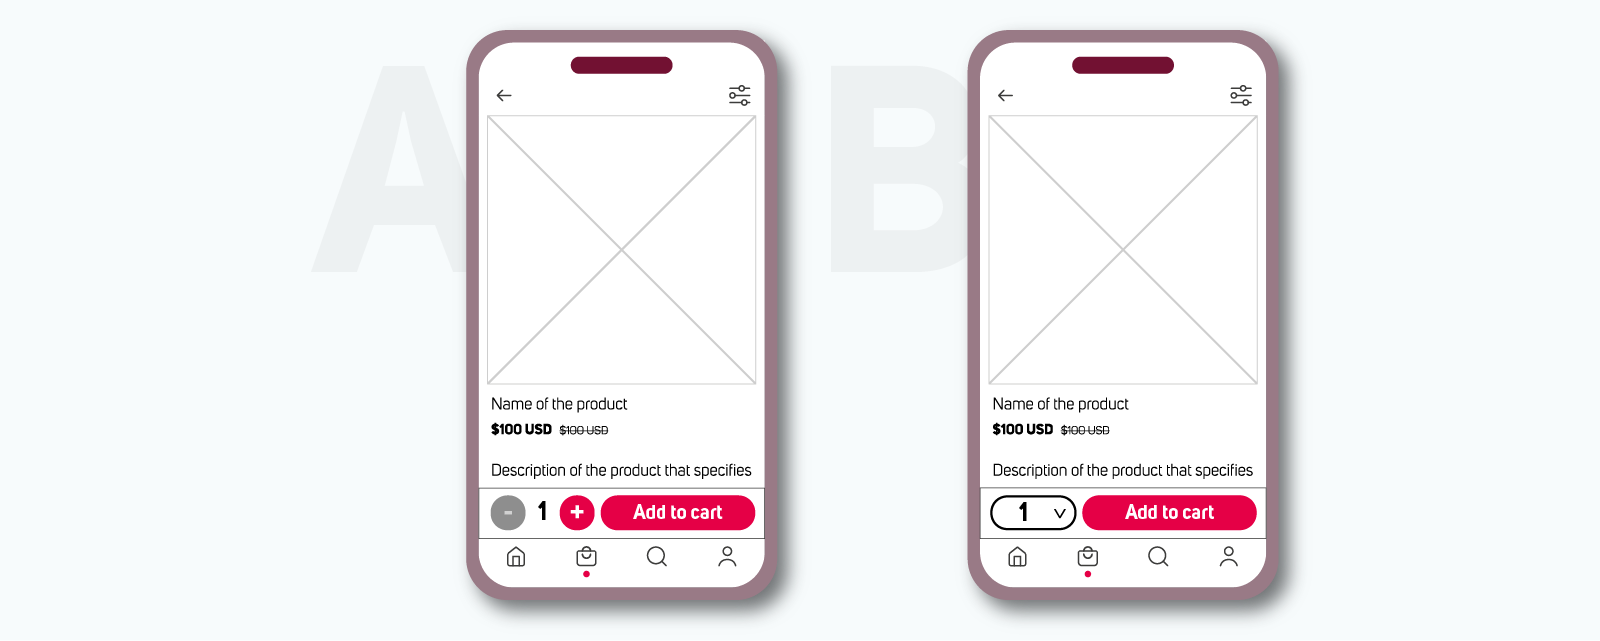 Examples of designs prepared for A/B testing